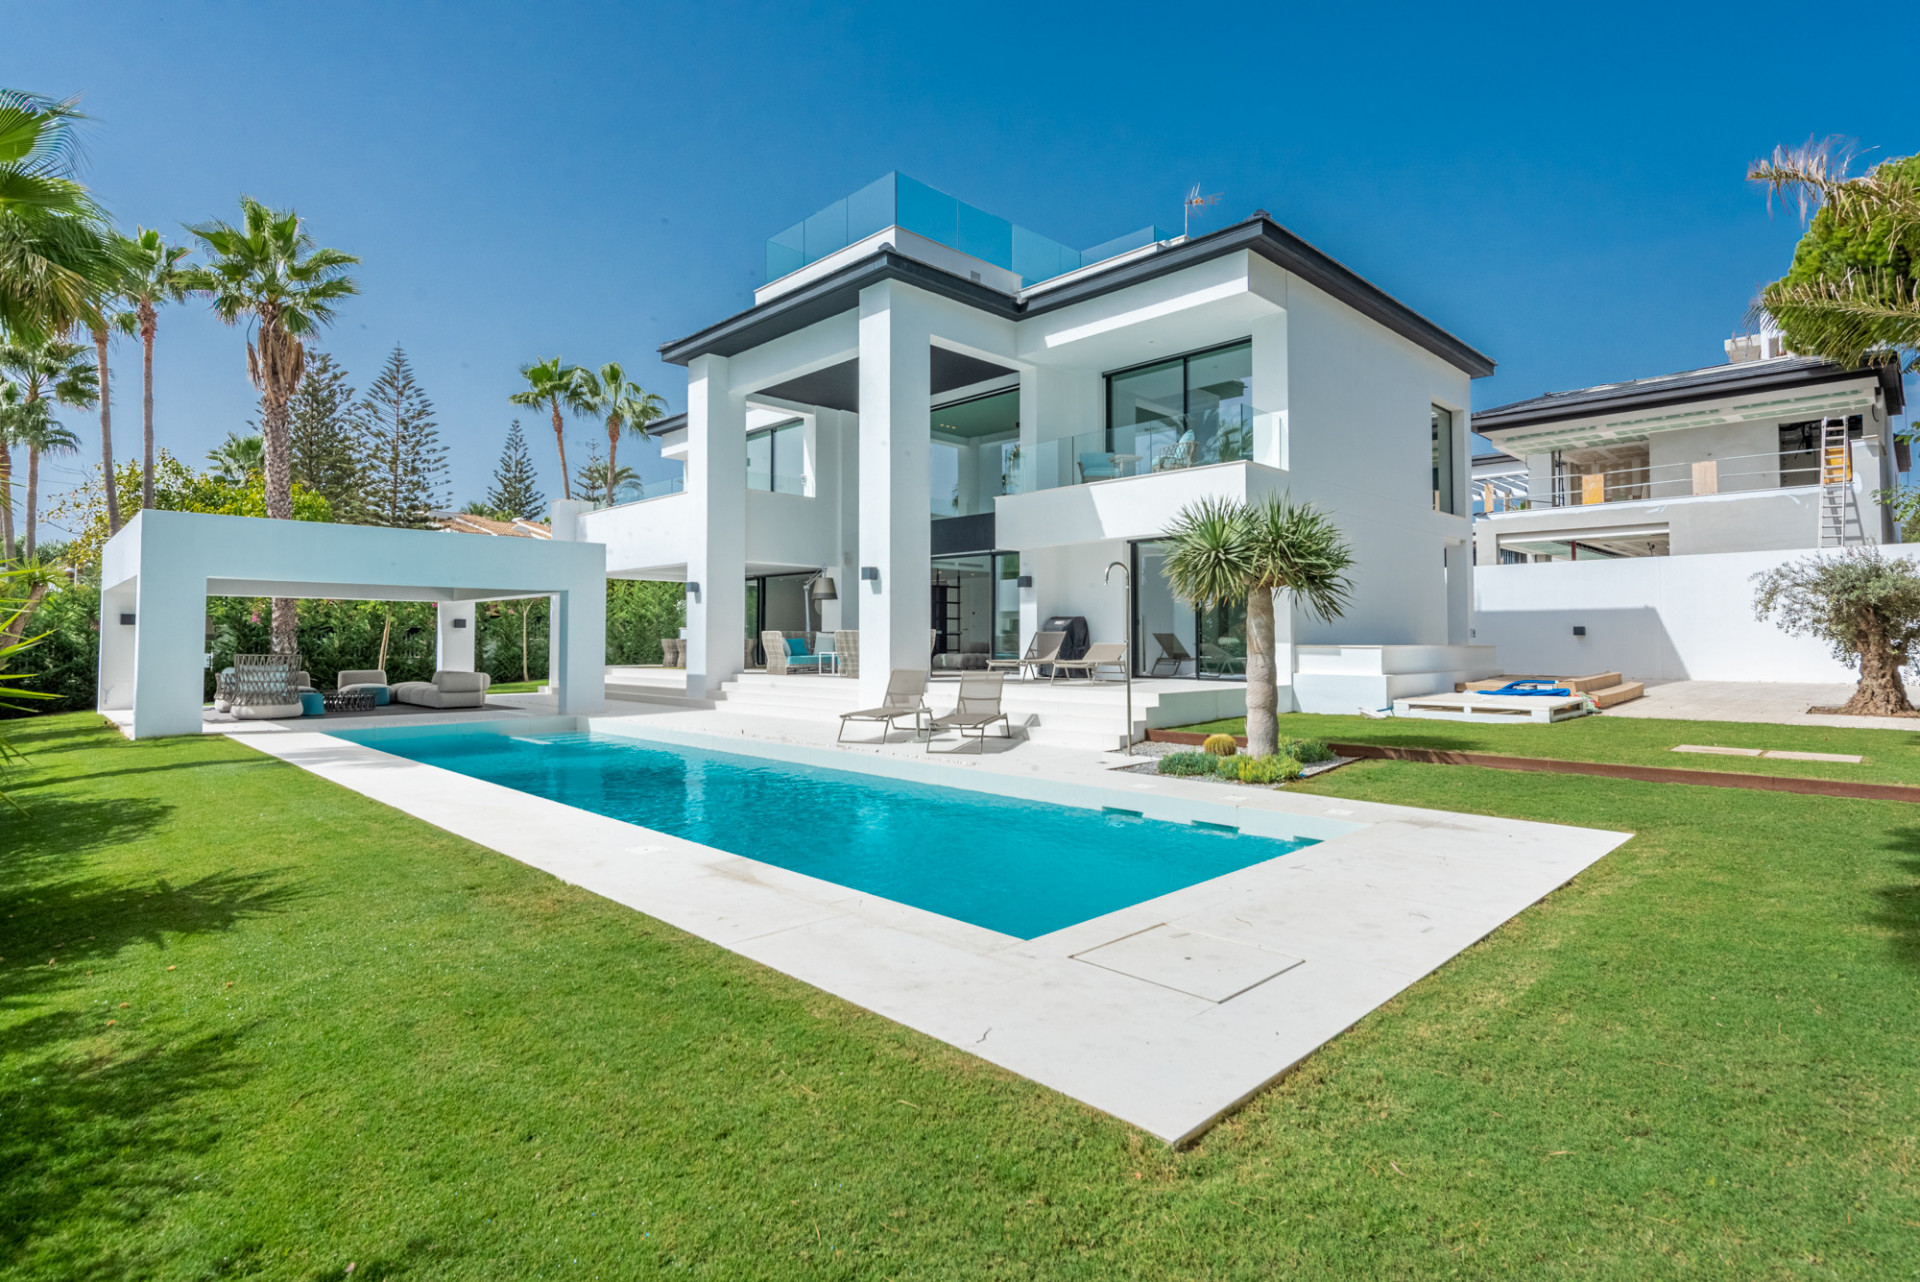 Newly-built villa walking distance from the beach and featuring  sea views from all levels in Cortijo Blanco